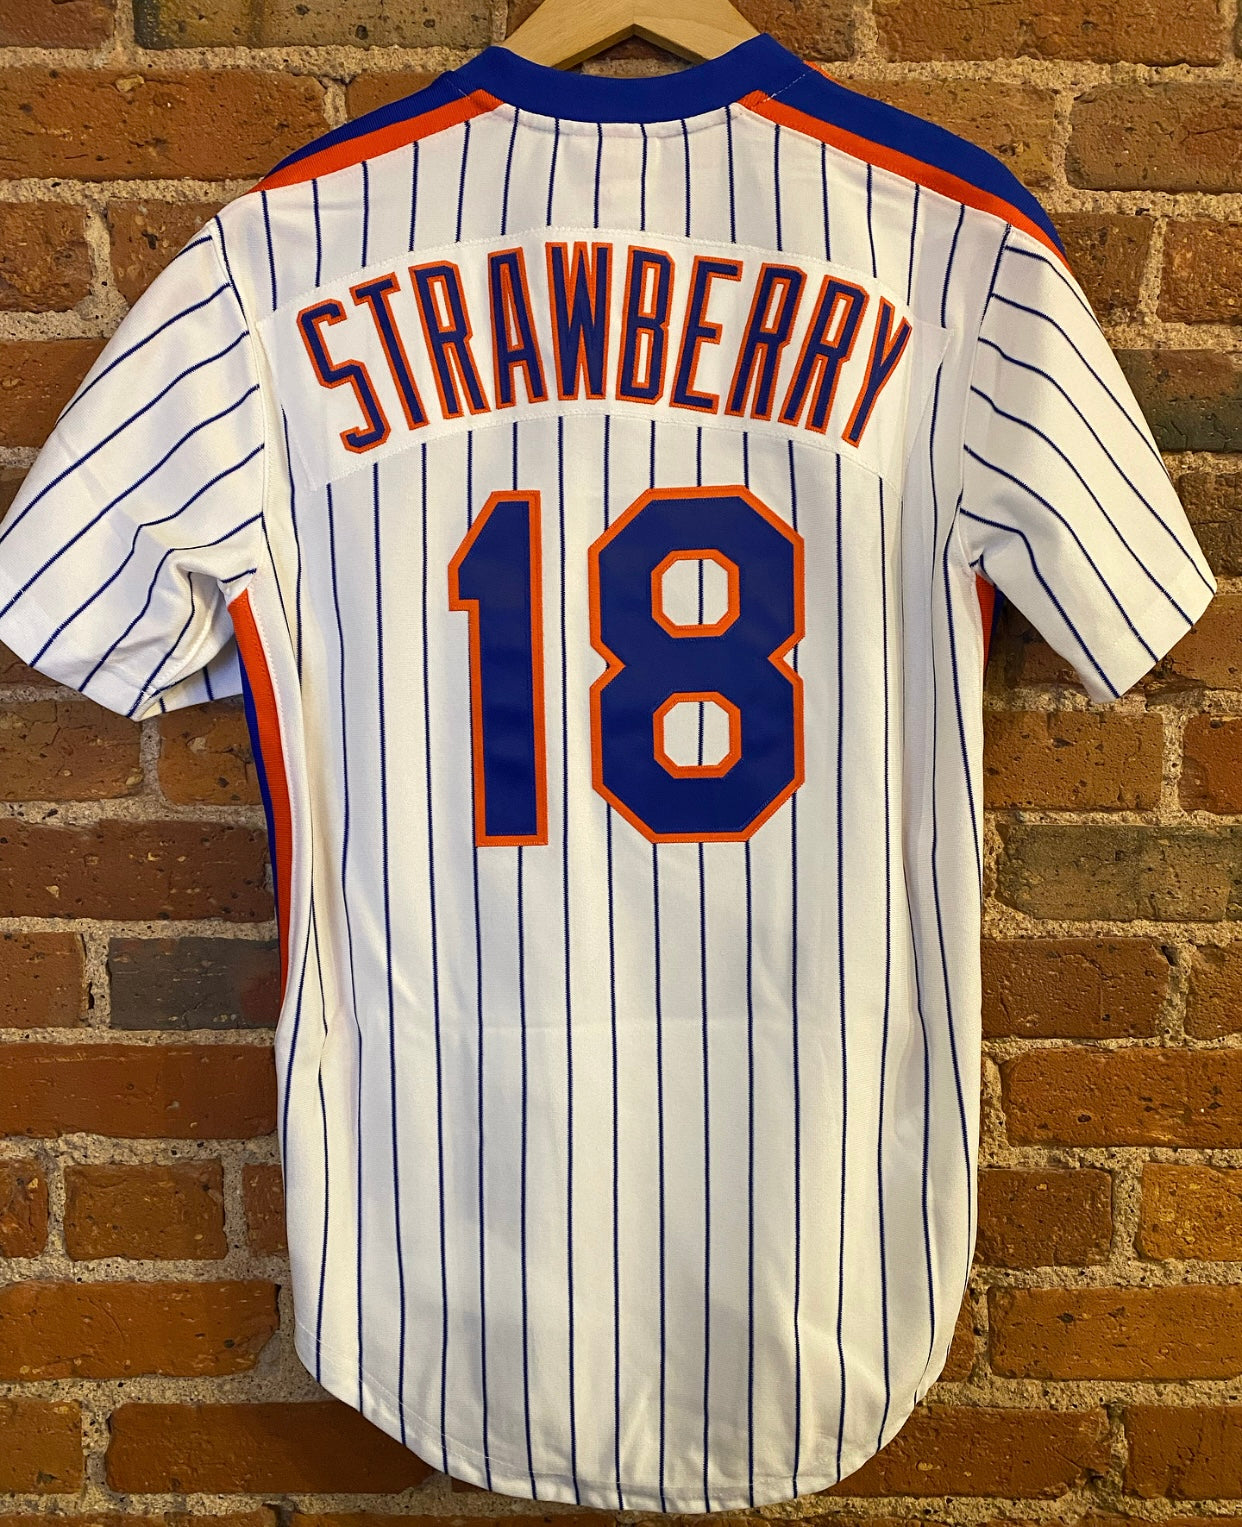 Authentic Darryl Strawberry 1986 New York Mets Home Jersey